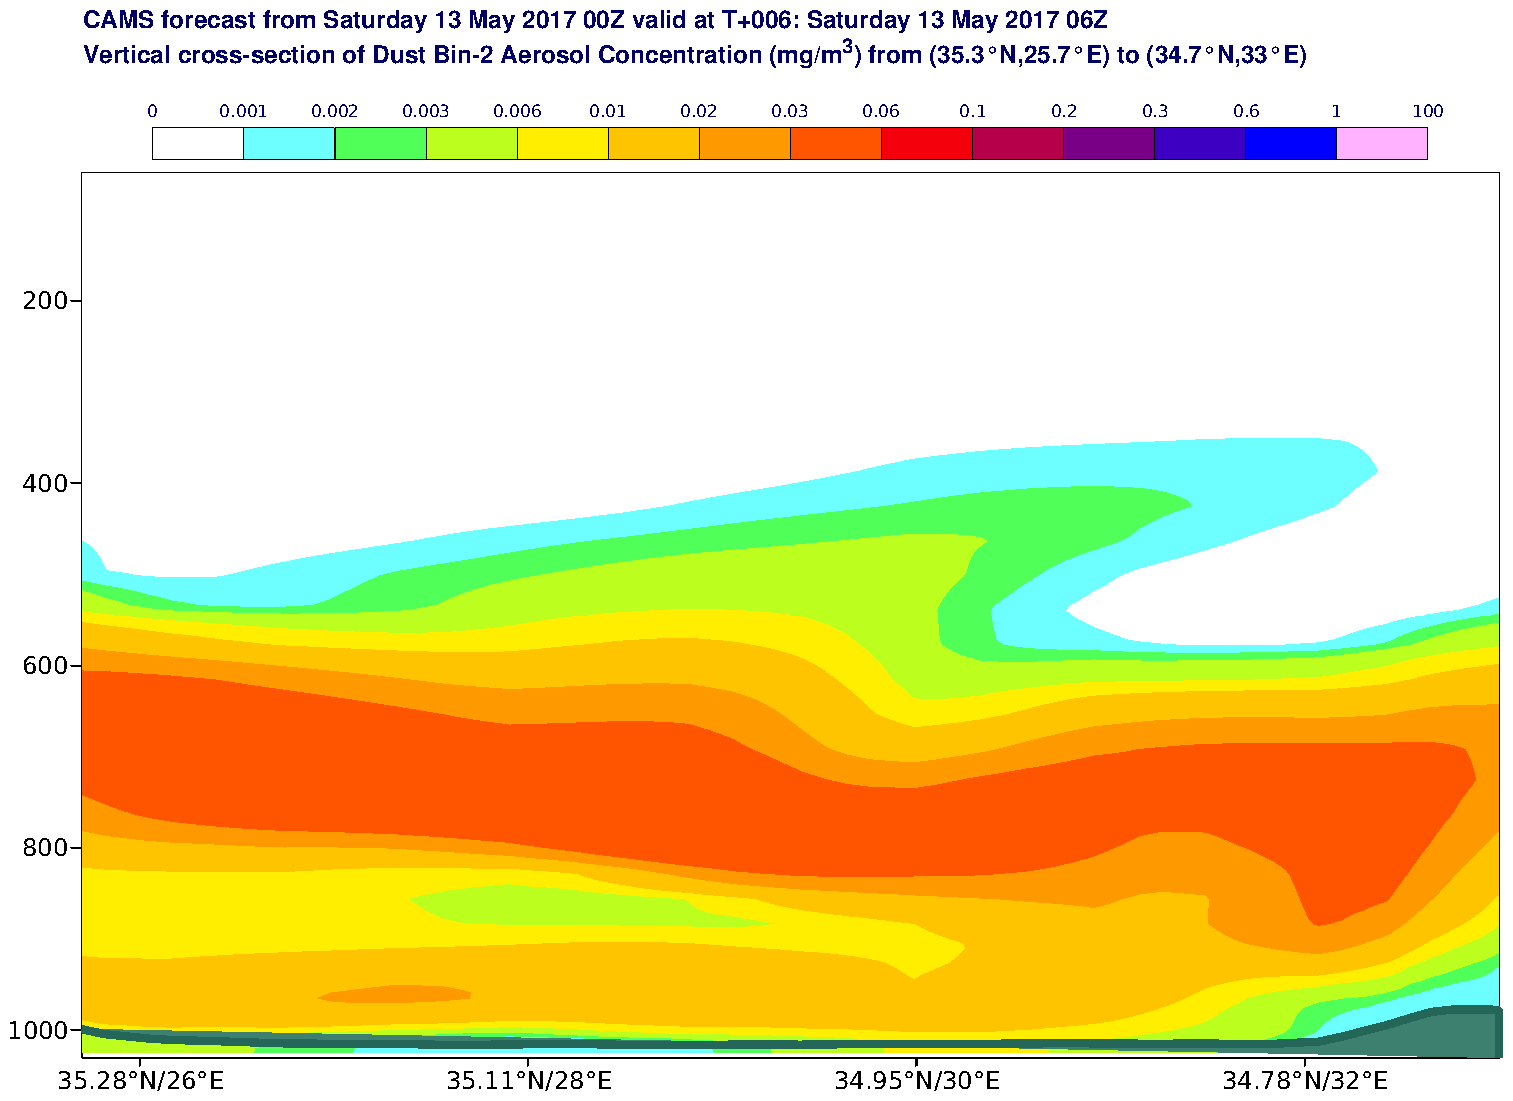 Vertical cross-section of Dust Bin-2 Aerosol Concentration (mg/m3) valid at T6 - 2017-05-13 06:00